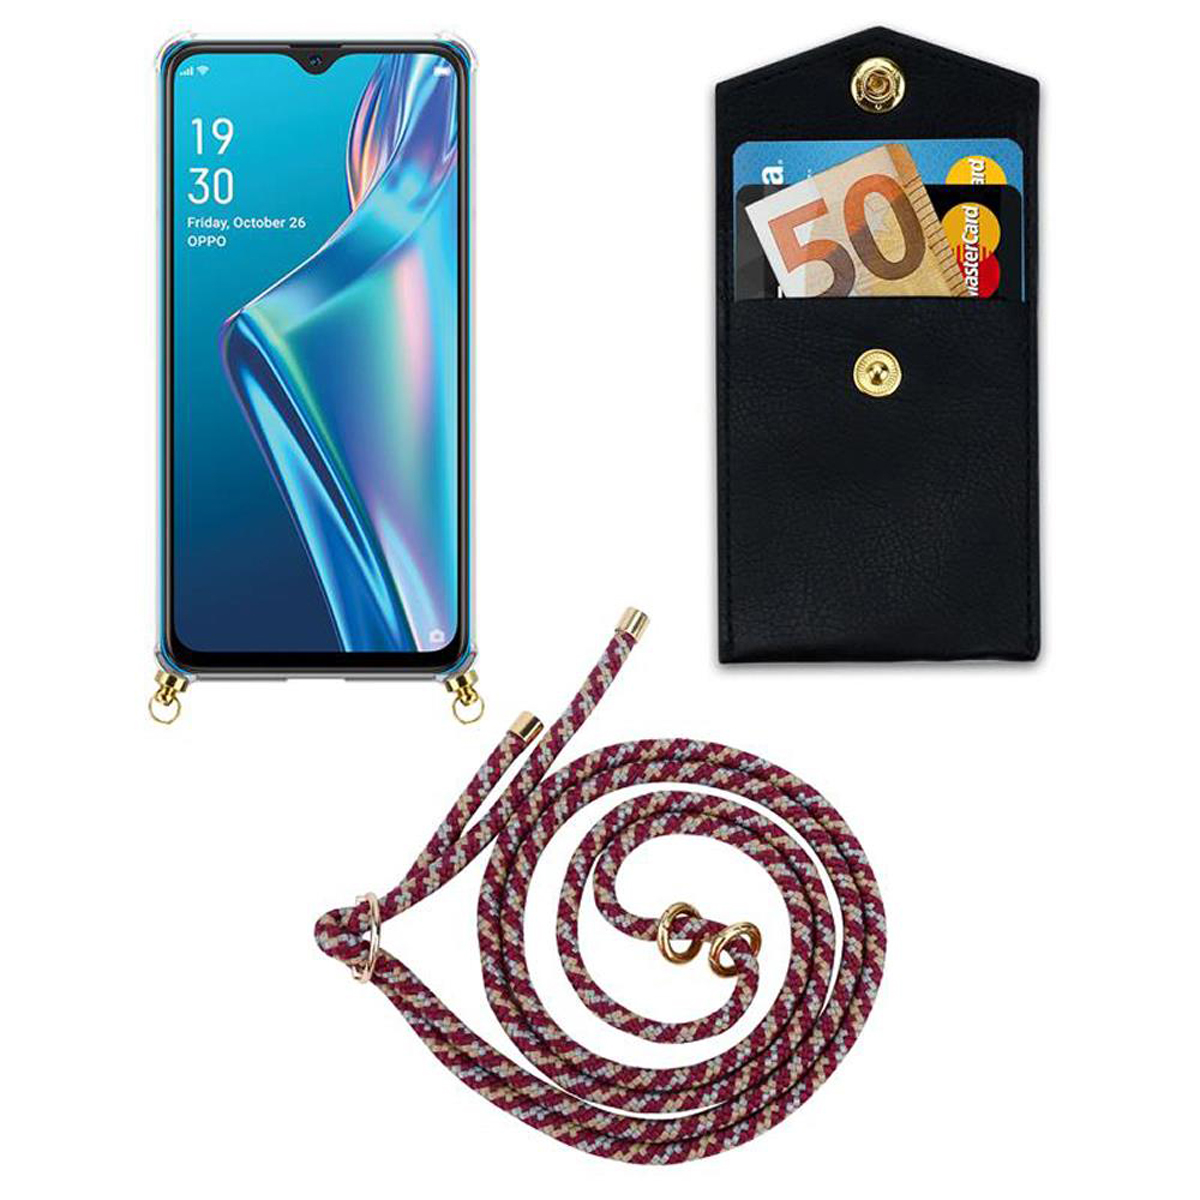 CADORABO Handy Kette mit Ringen, WEIß Hülle, Gold Band A12, abnehmbarer und Oppo, Backcover, ROT Kordel GELB